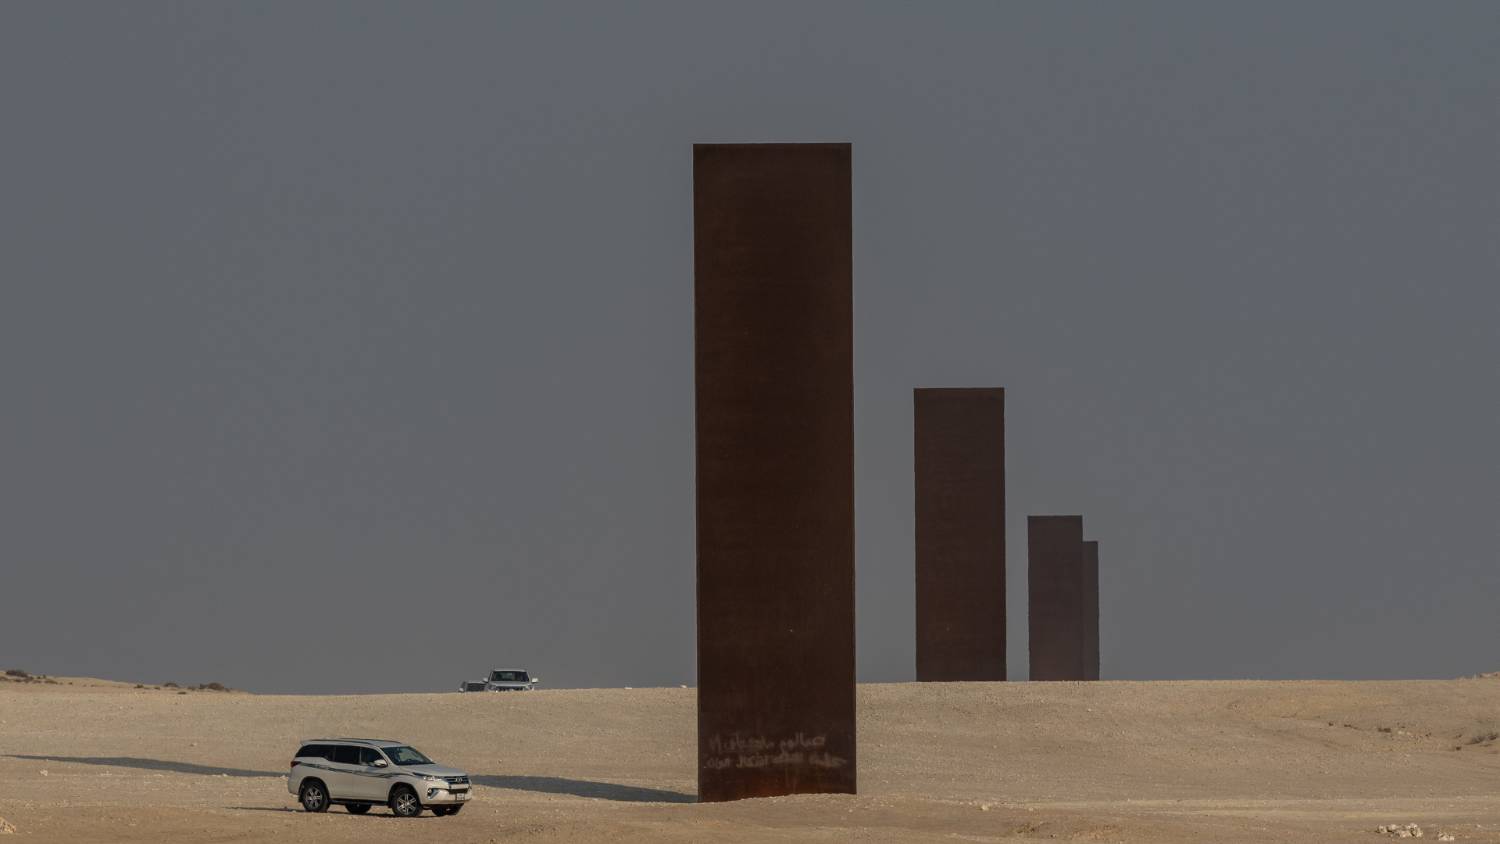 Richard Serra's art sands tall in Qatar's Brouq nature reserve, one hour drive west of Doha (AFP)